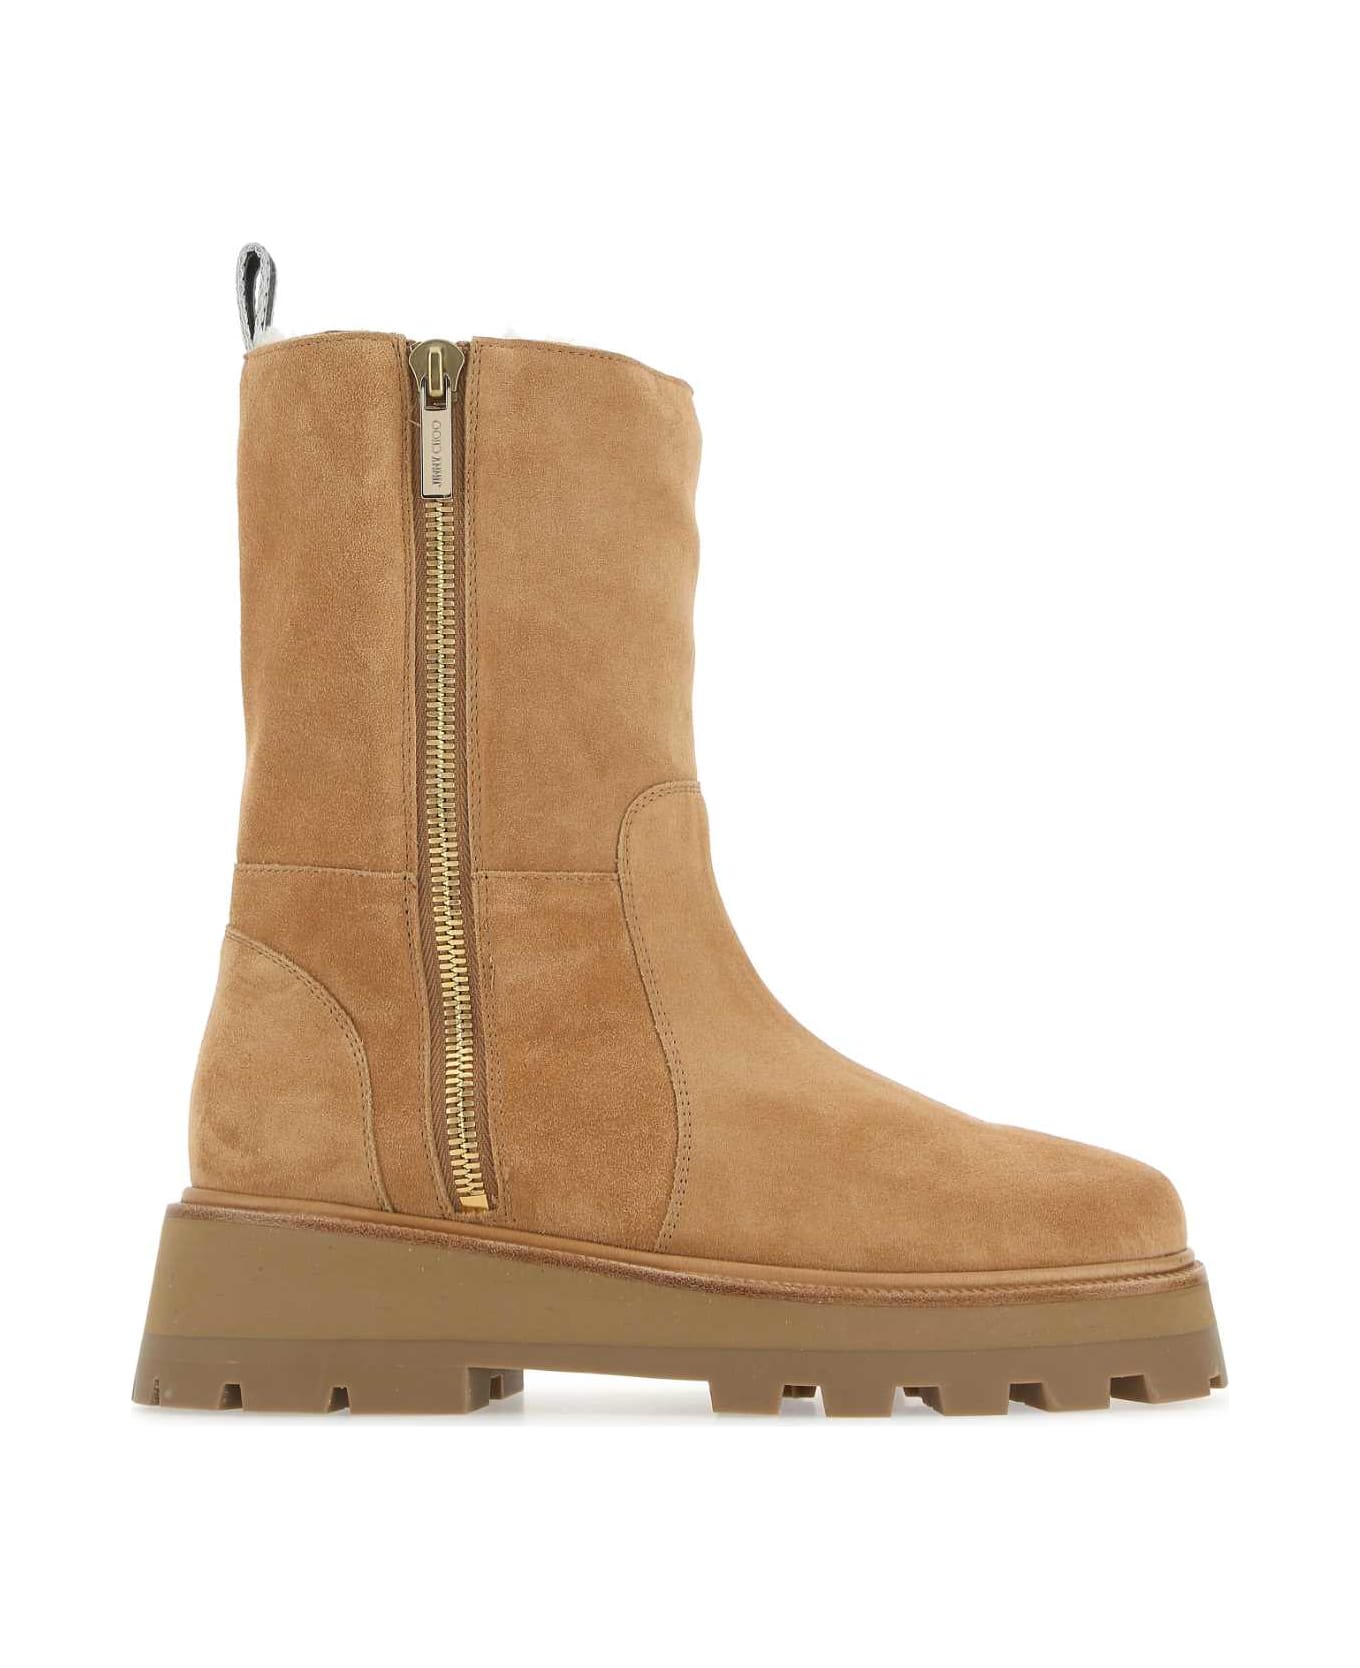 Jimmy Choo Camel Suede Bayu Ankle Boots - CARAMELNATURAL